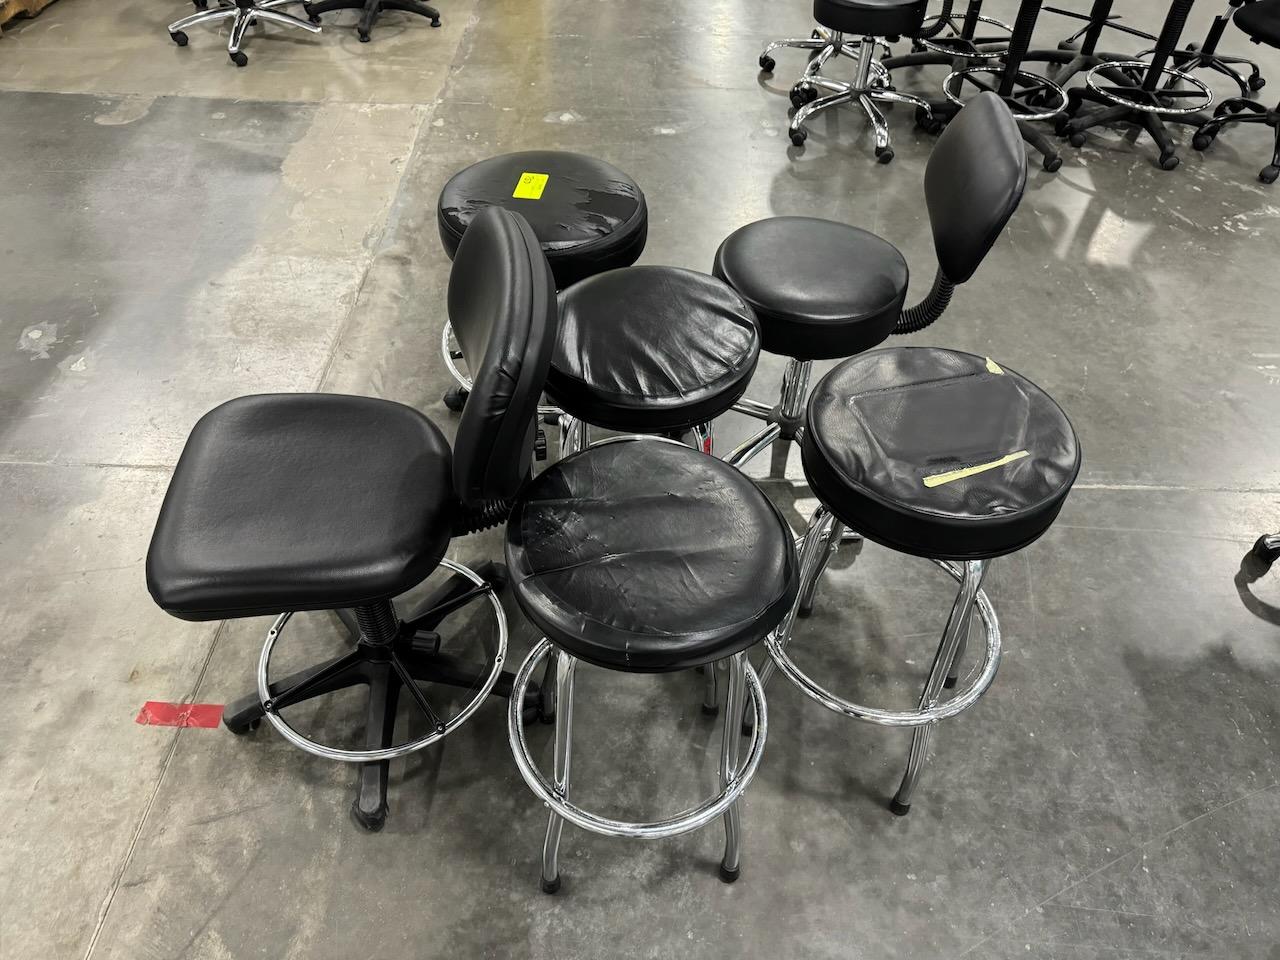 Stools/Chairs